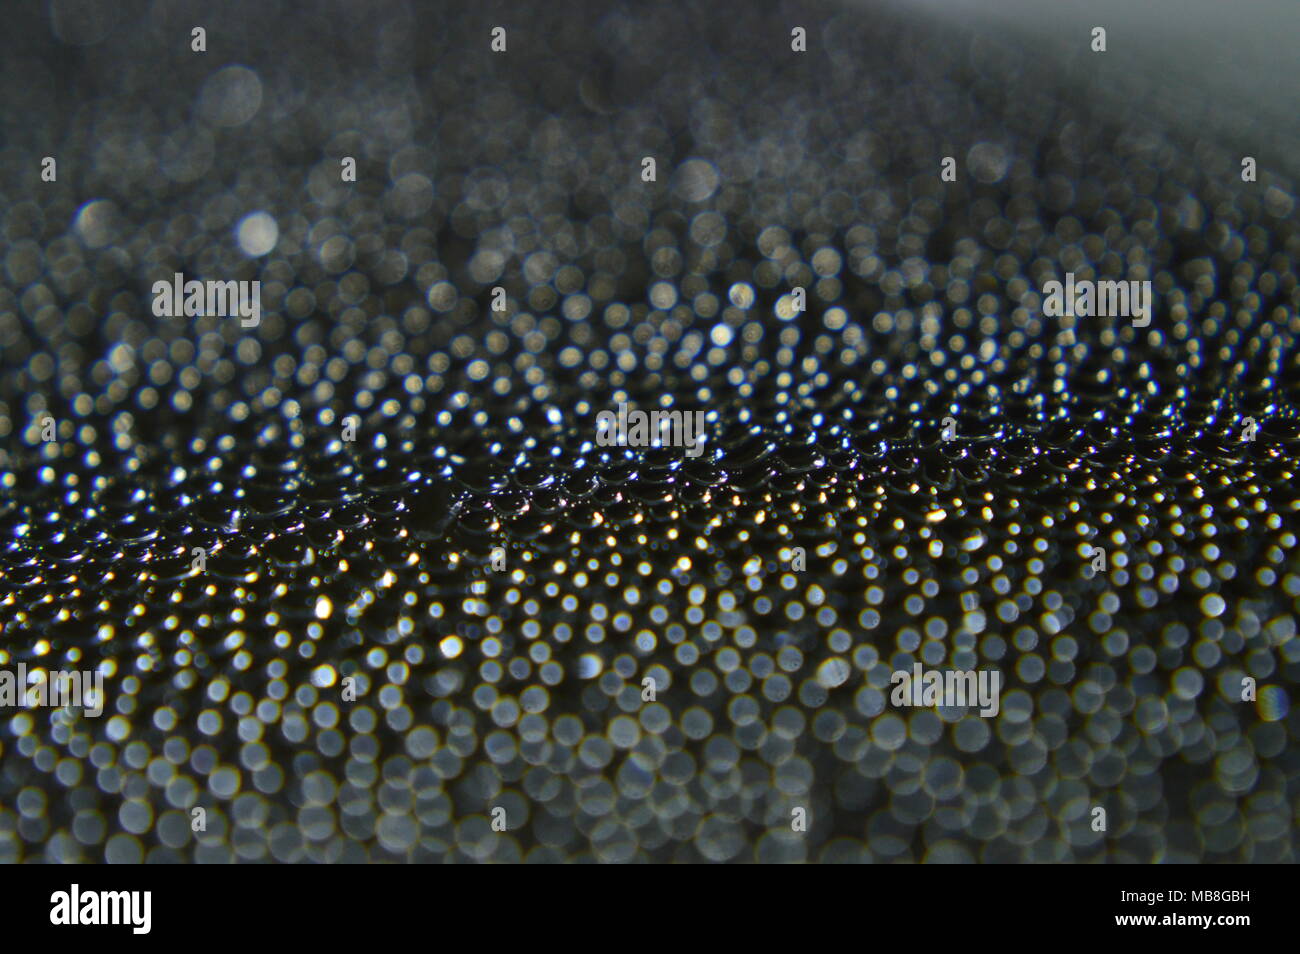 Rainbow effect on condensation droplets 20x magnification Stock Photo